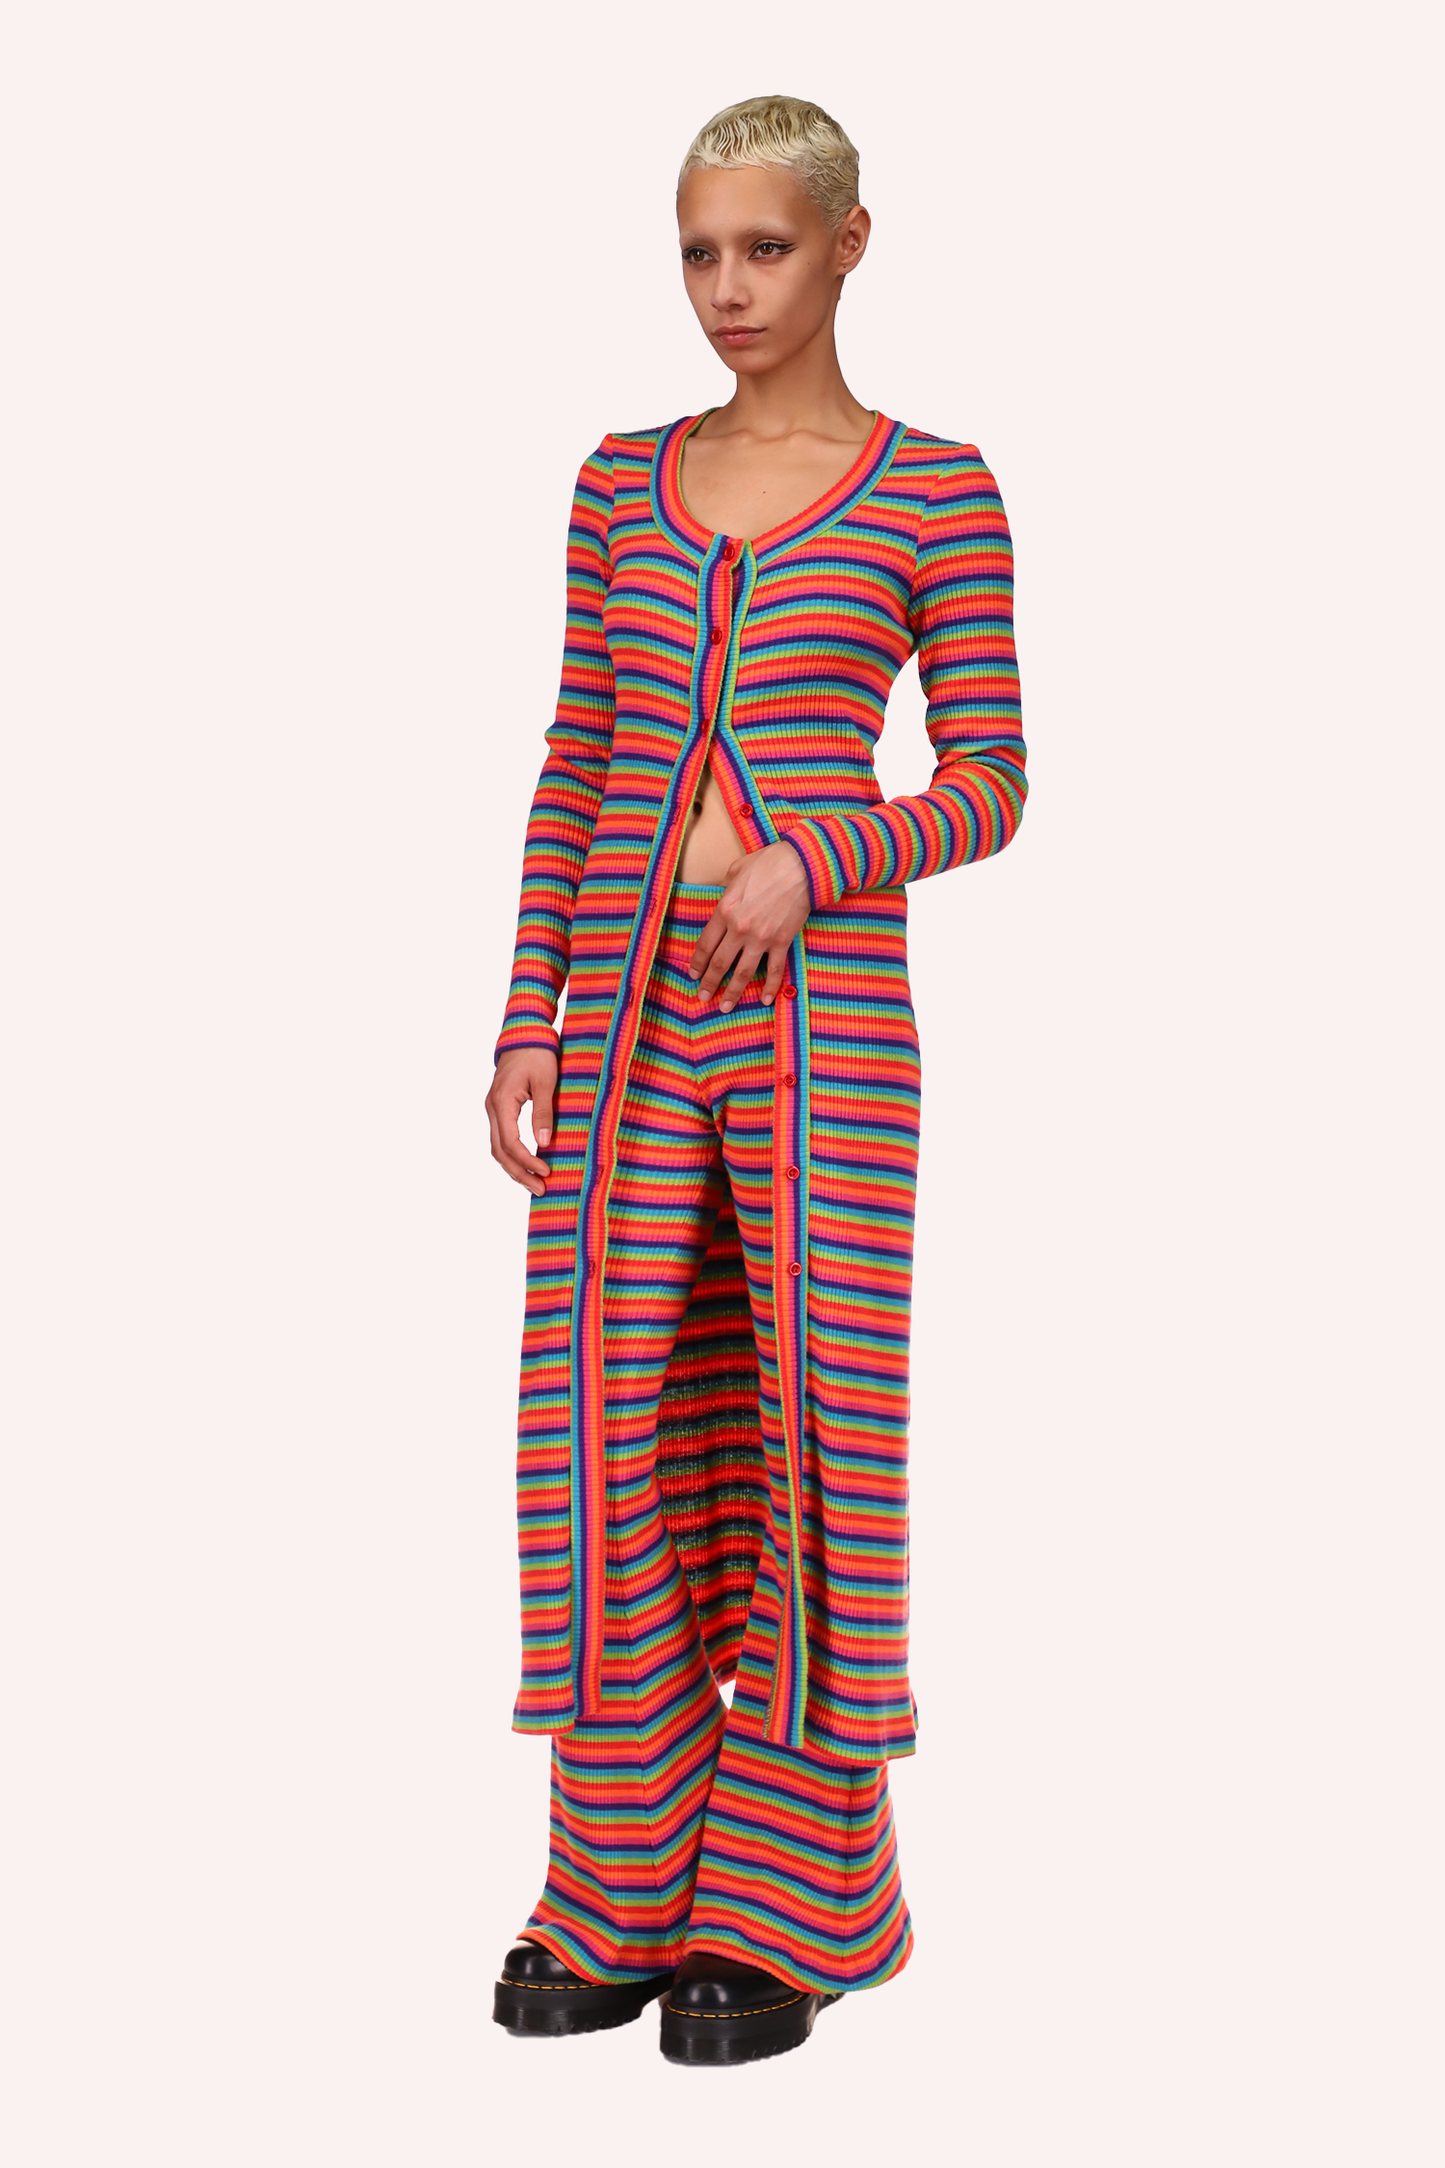 You can match all Rainbow Stripe attire together for a stunning look